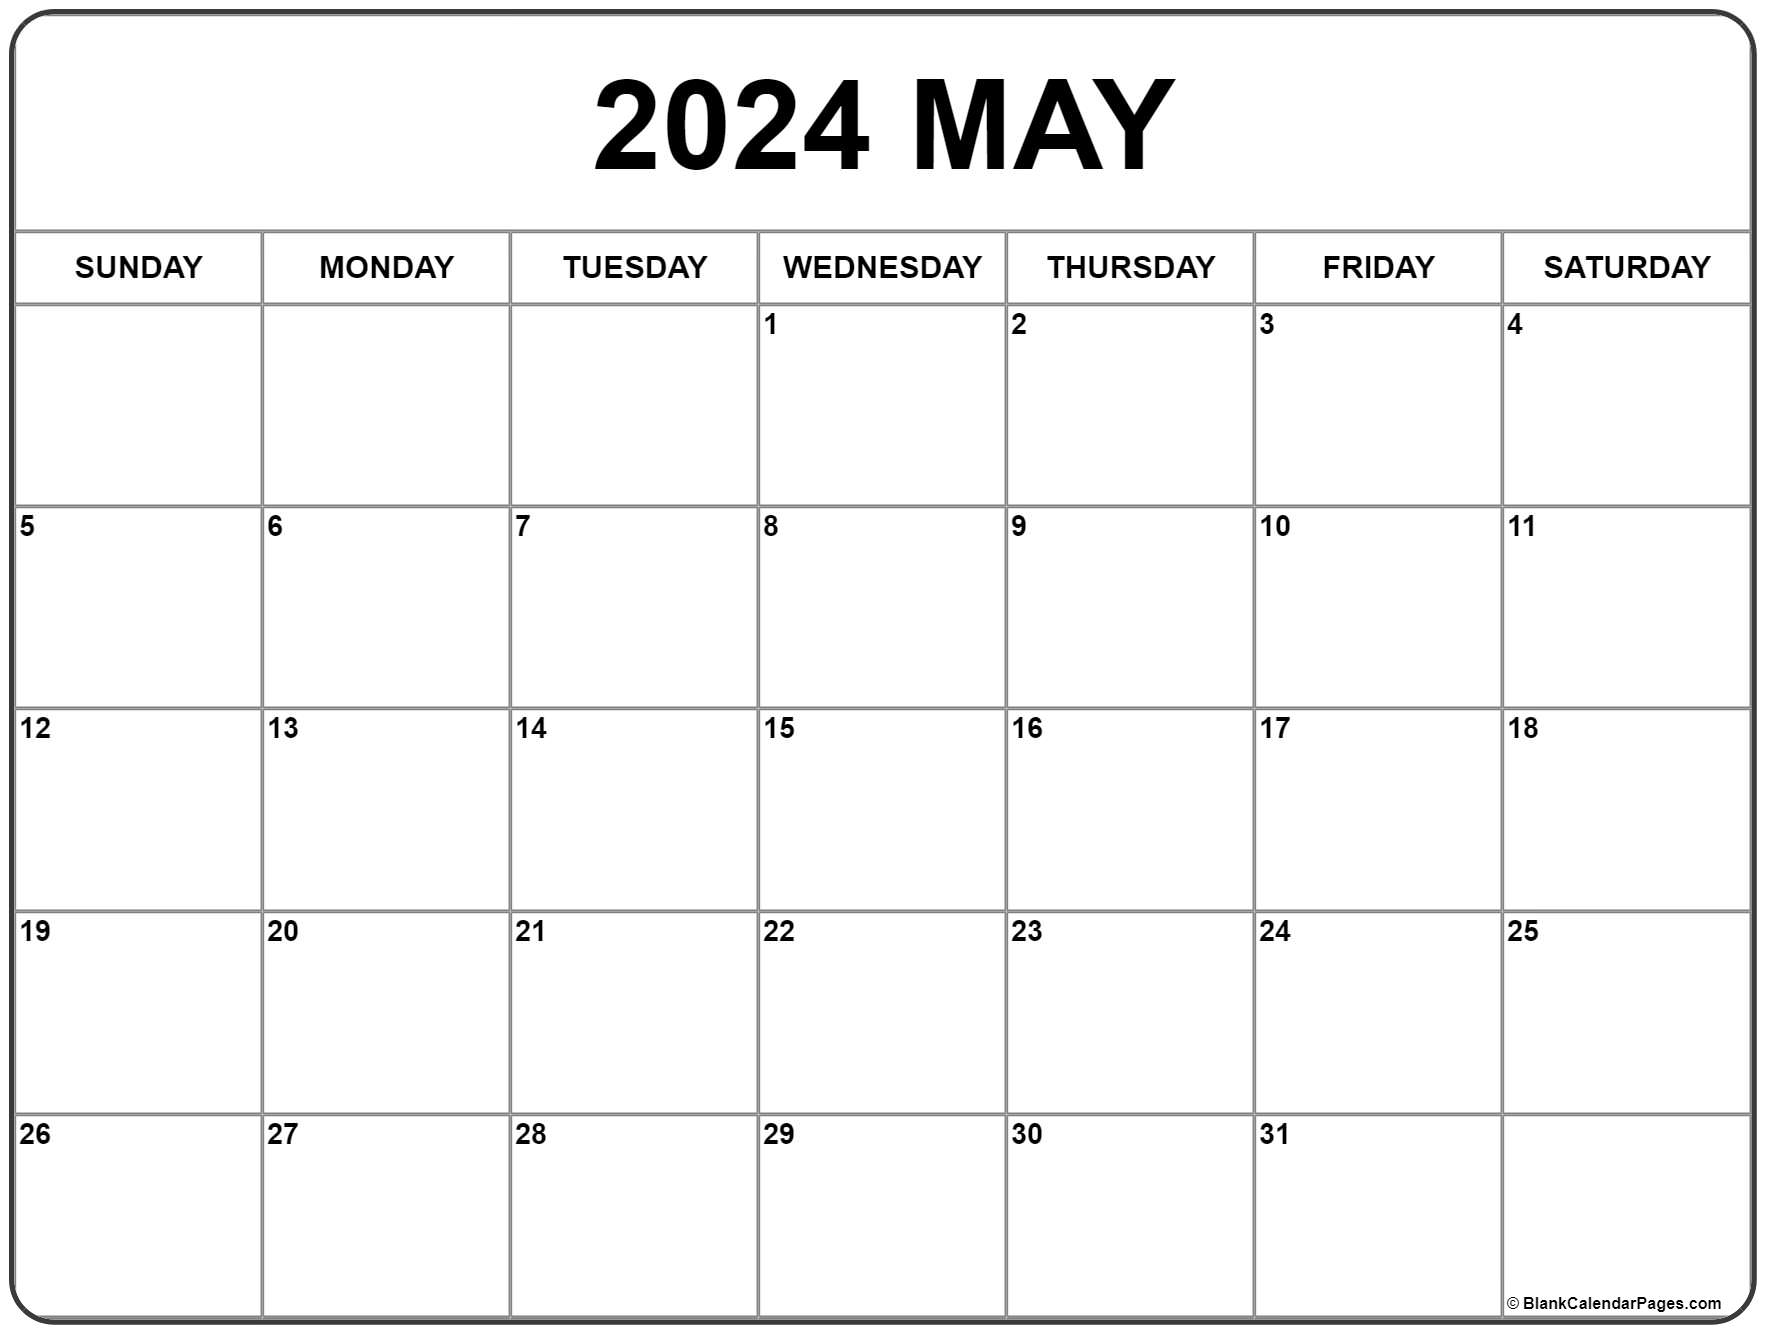 May 2020 Calendar - FREE DOWNLOAD - Aashe